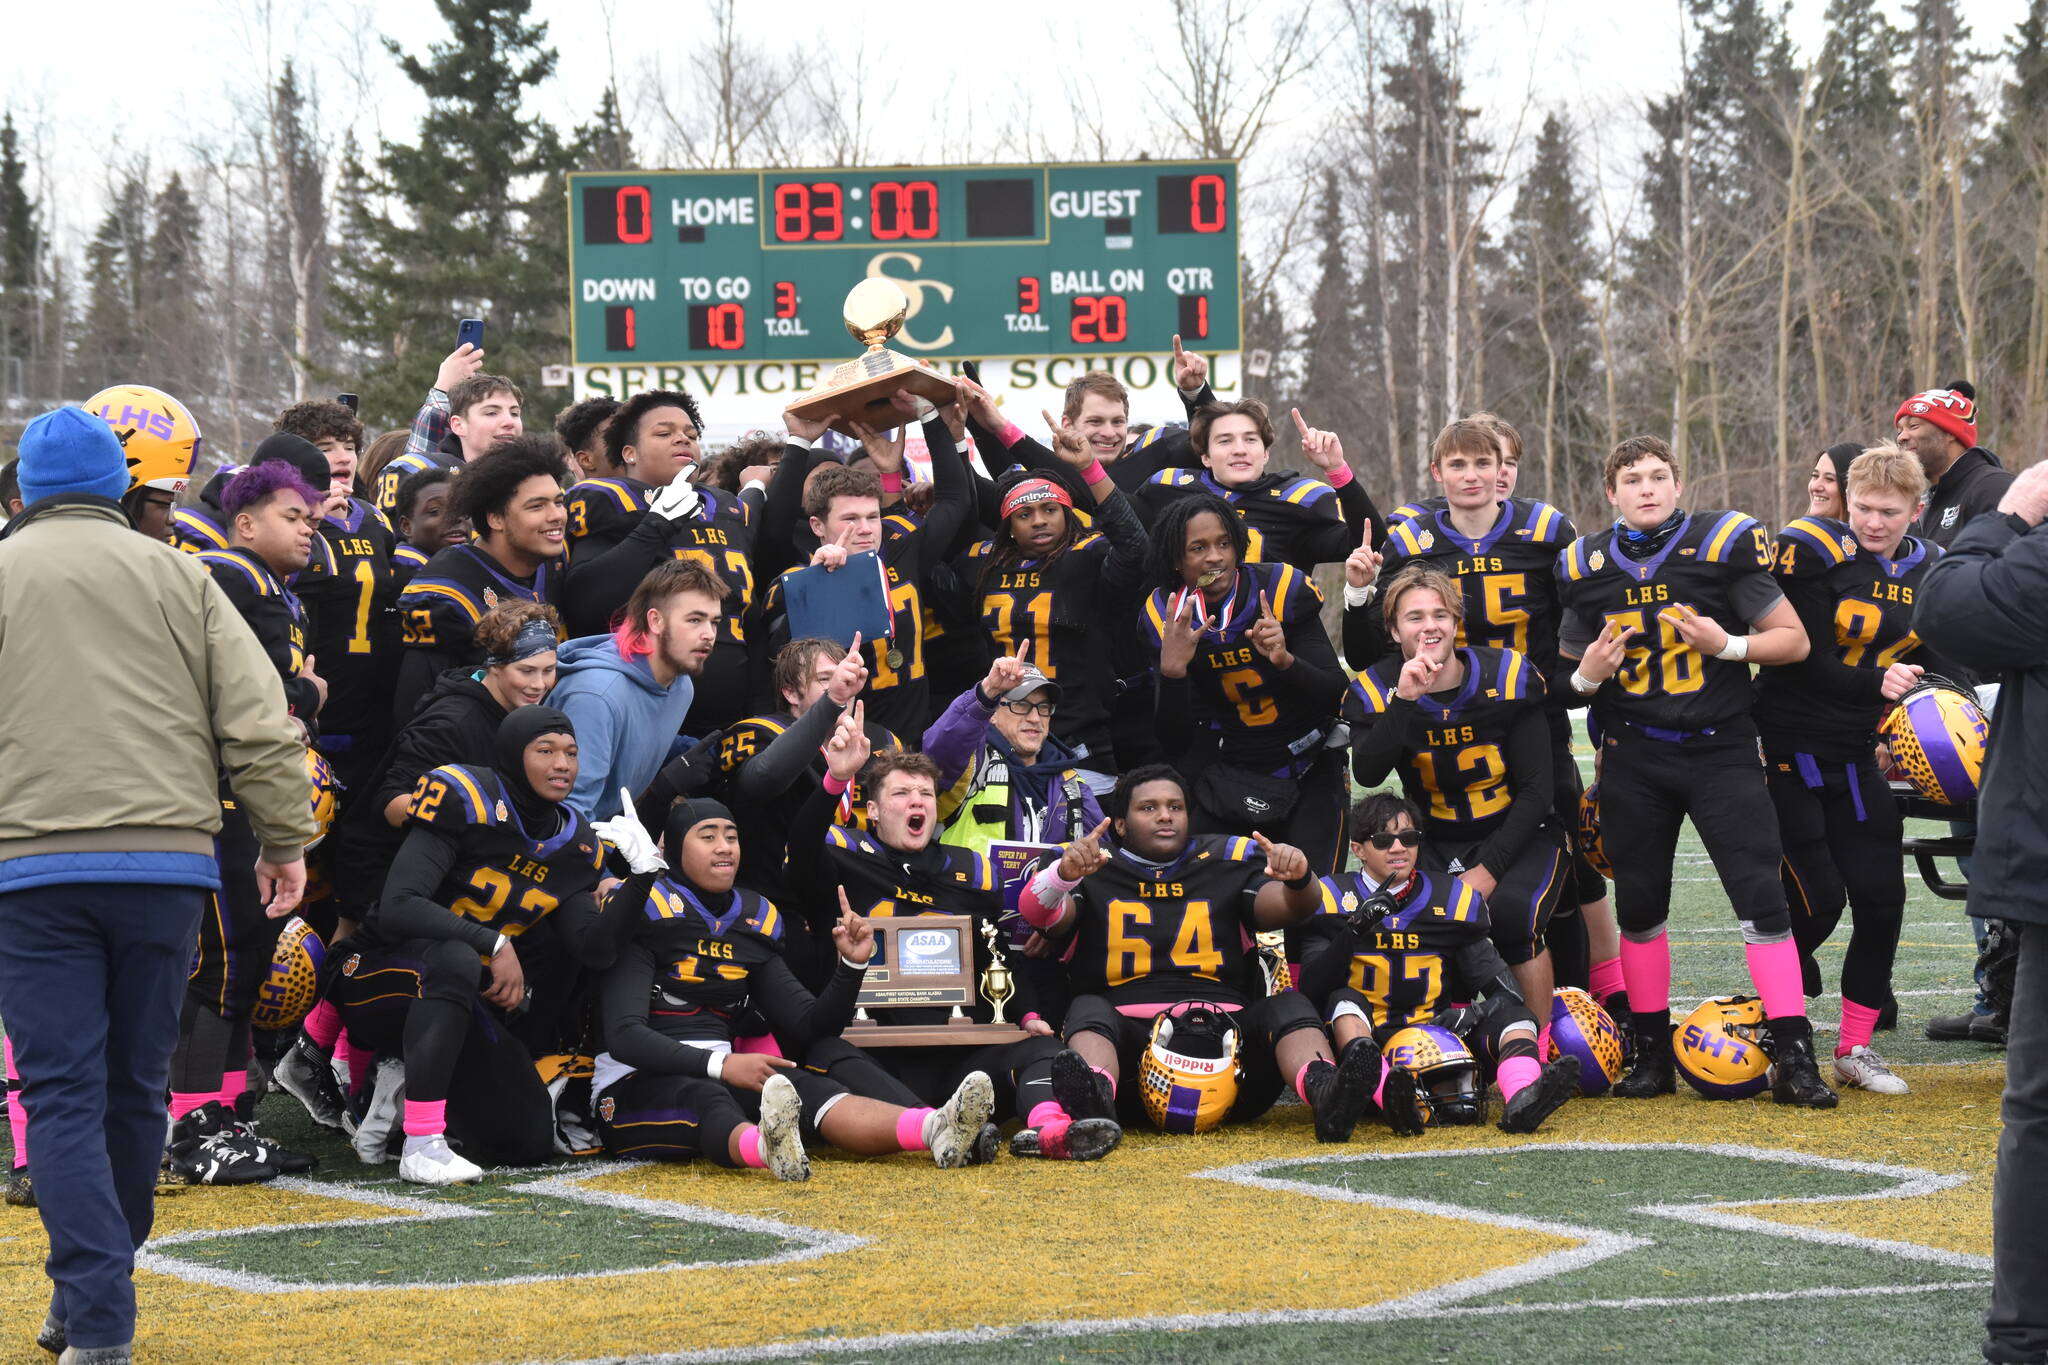 Lathrop celebrates defeating Soldotna for the Division II state title Saturday, Oct. 15, 2022, at Service High School in Anchorage, Alaska. (Photo by Jeff Helminiak/Peninsula Clarion)